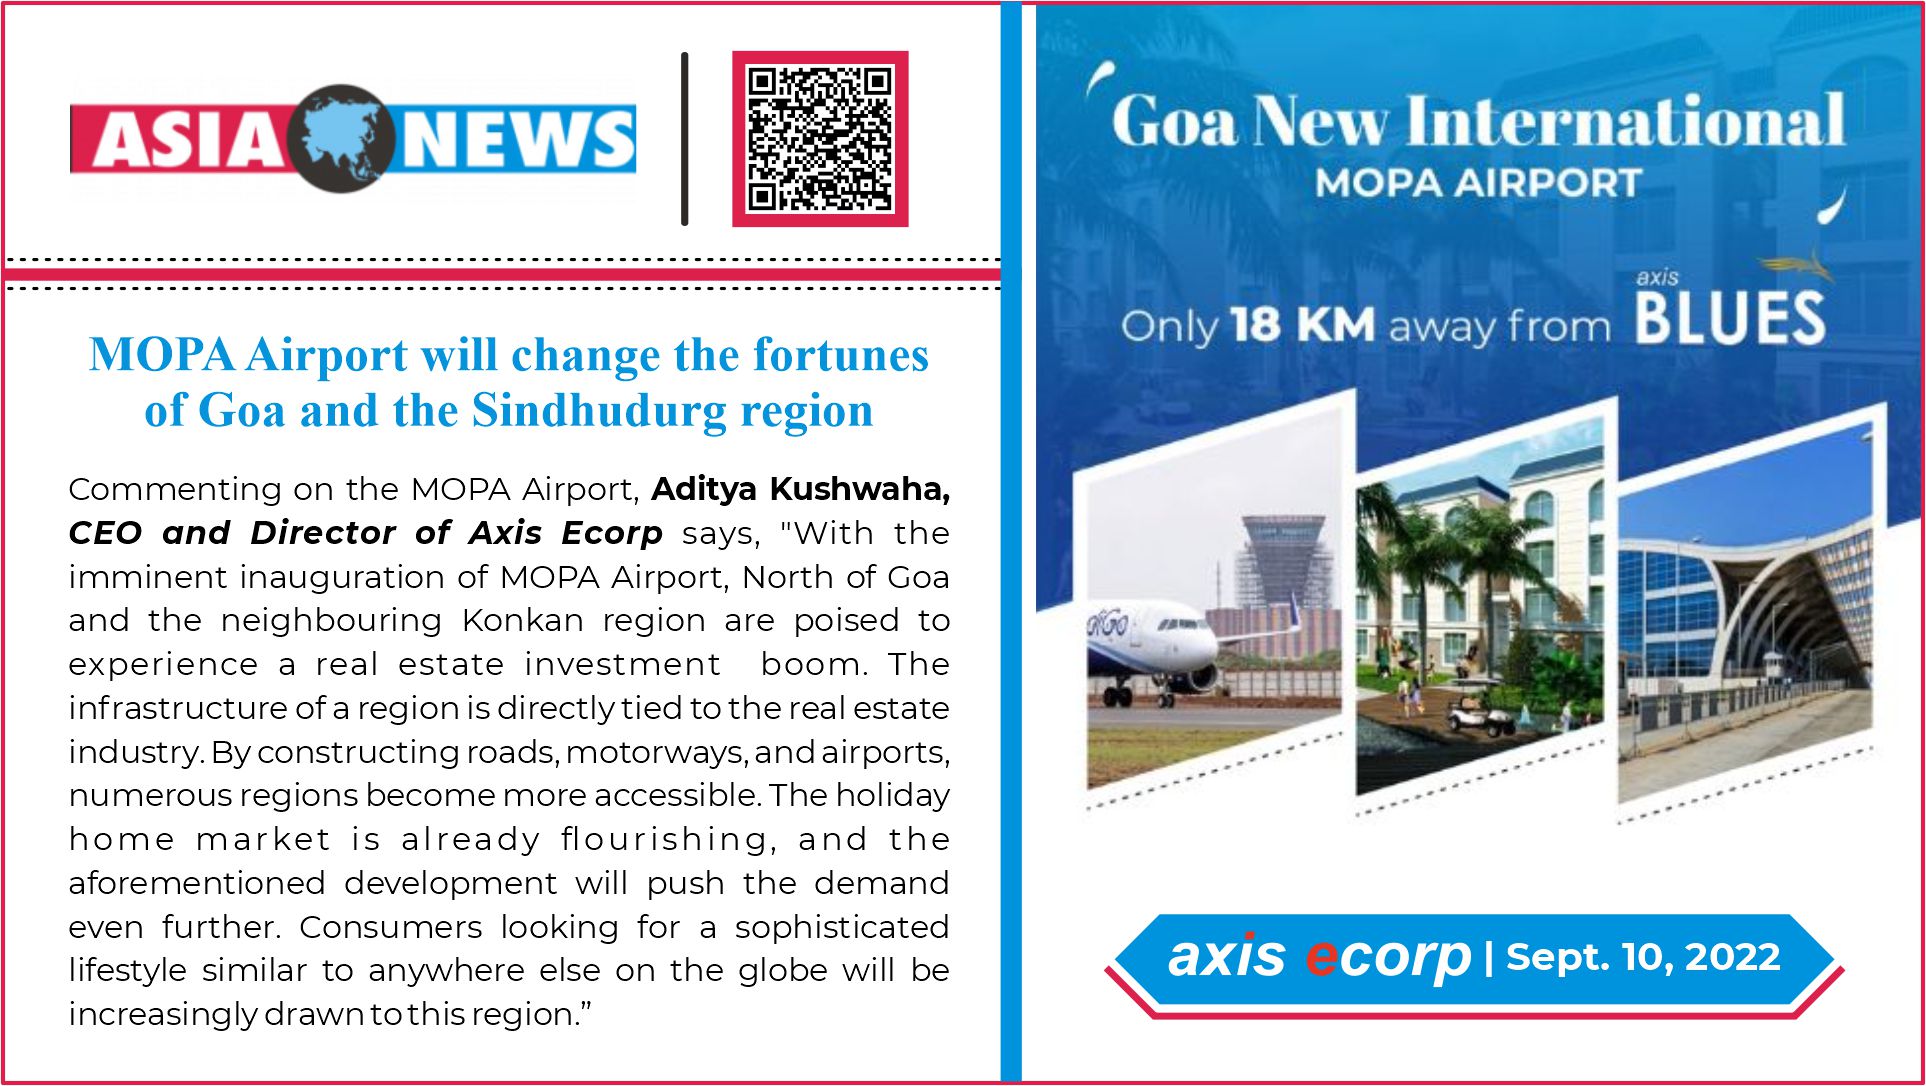 MOPA Airport will change the fortunes of Goa and the Sindhudurg region 